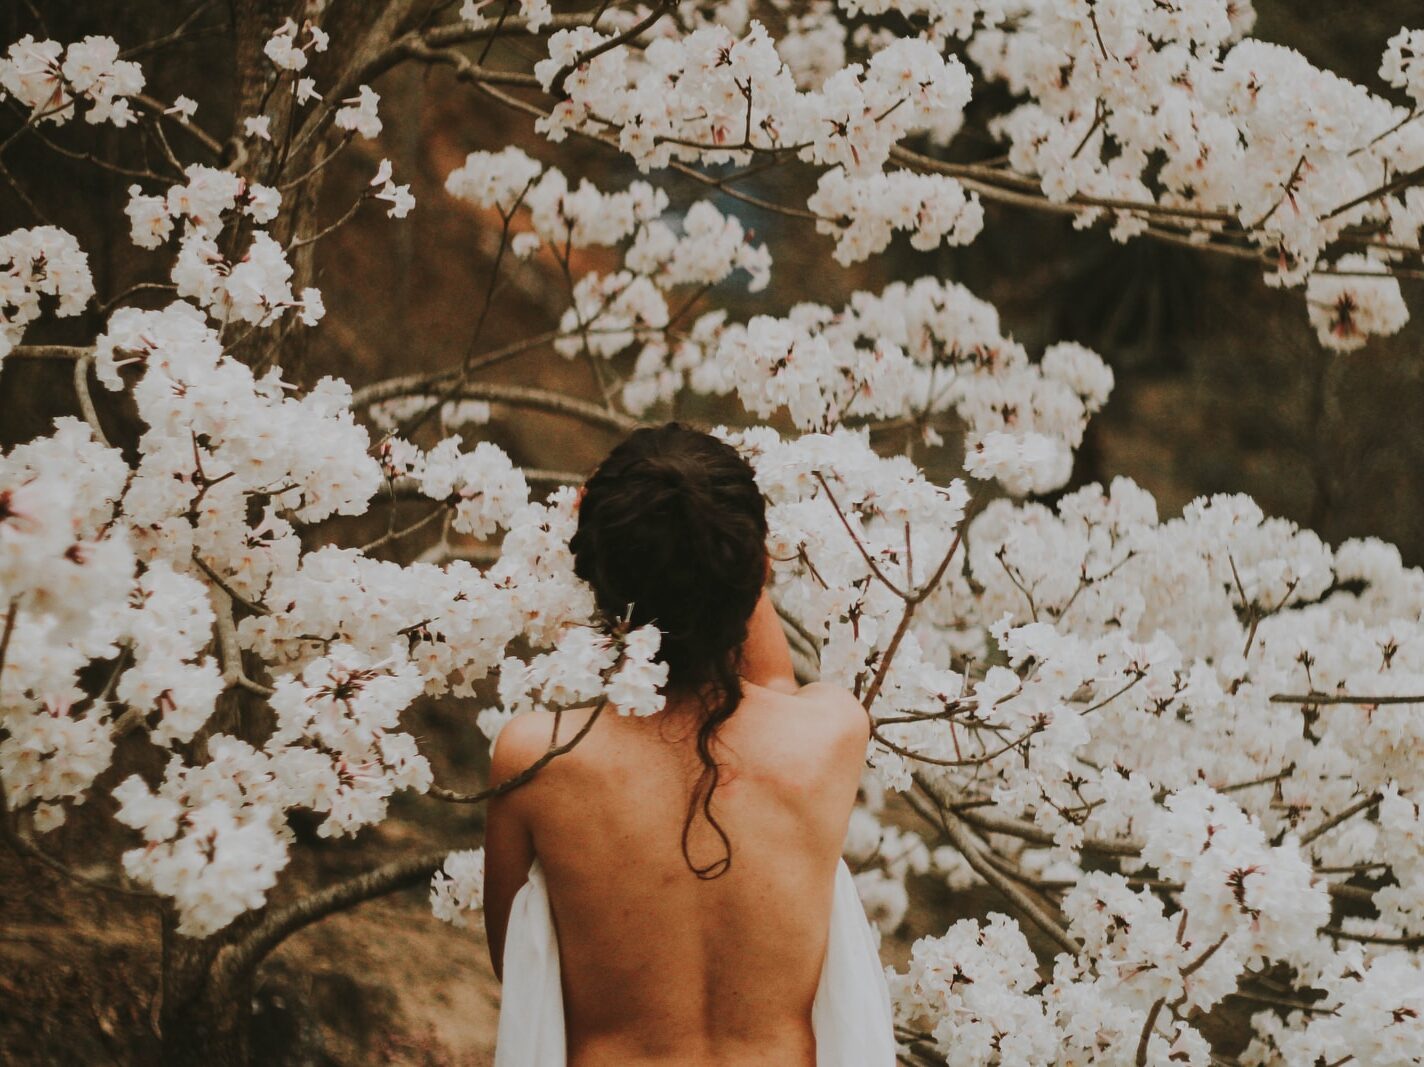 topless person standing near white petaled flowers